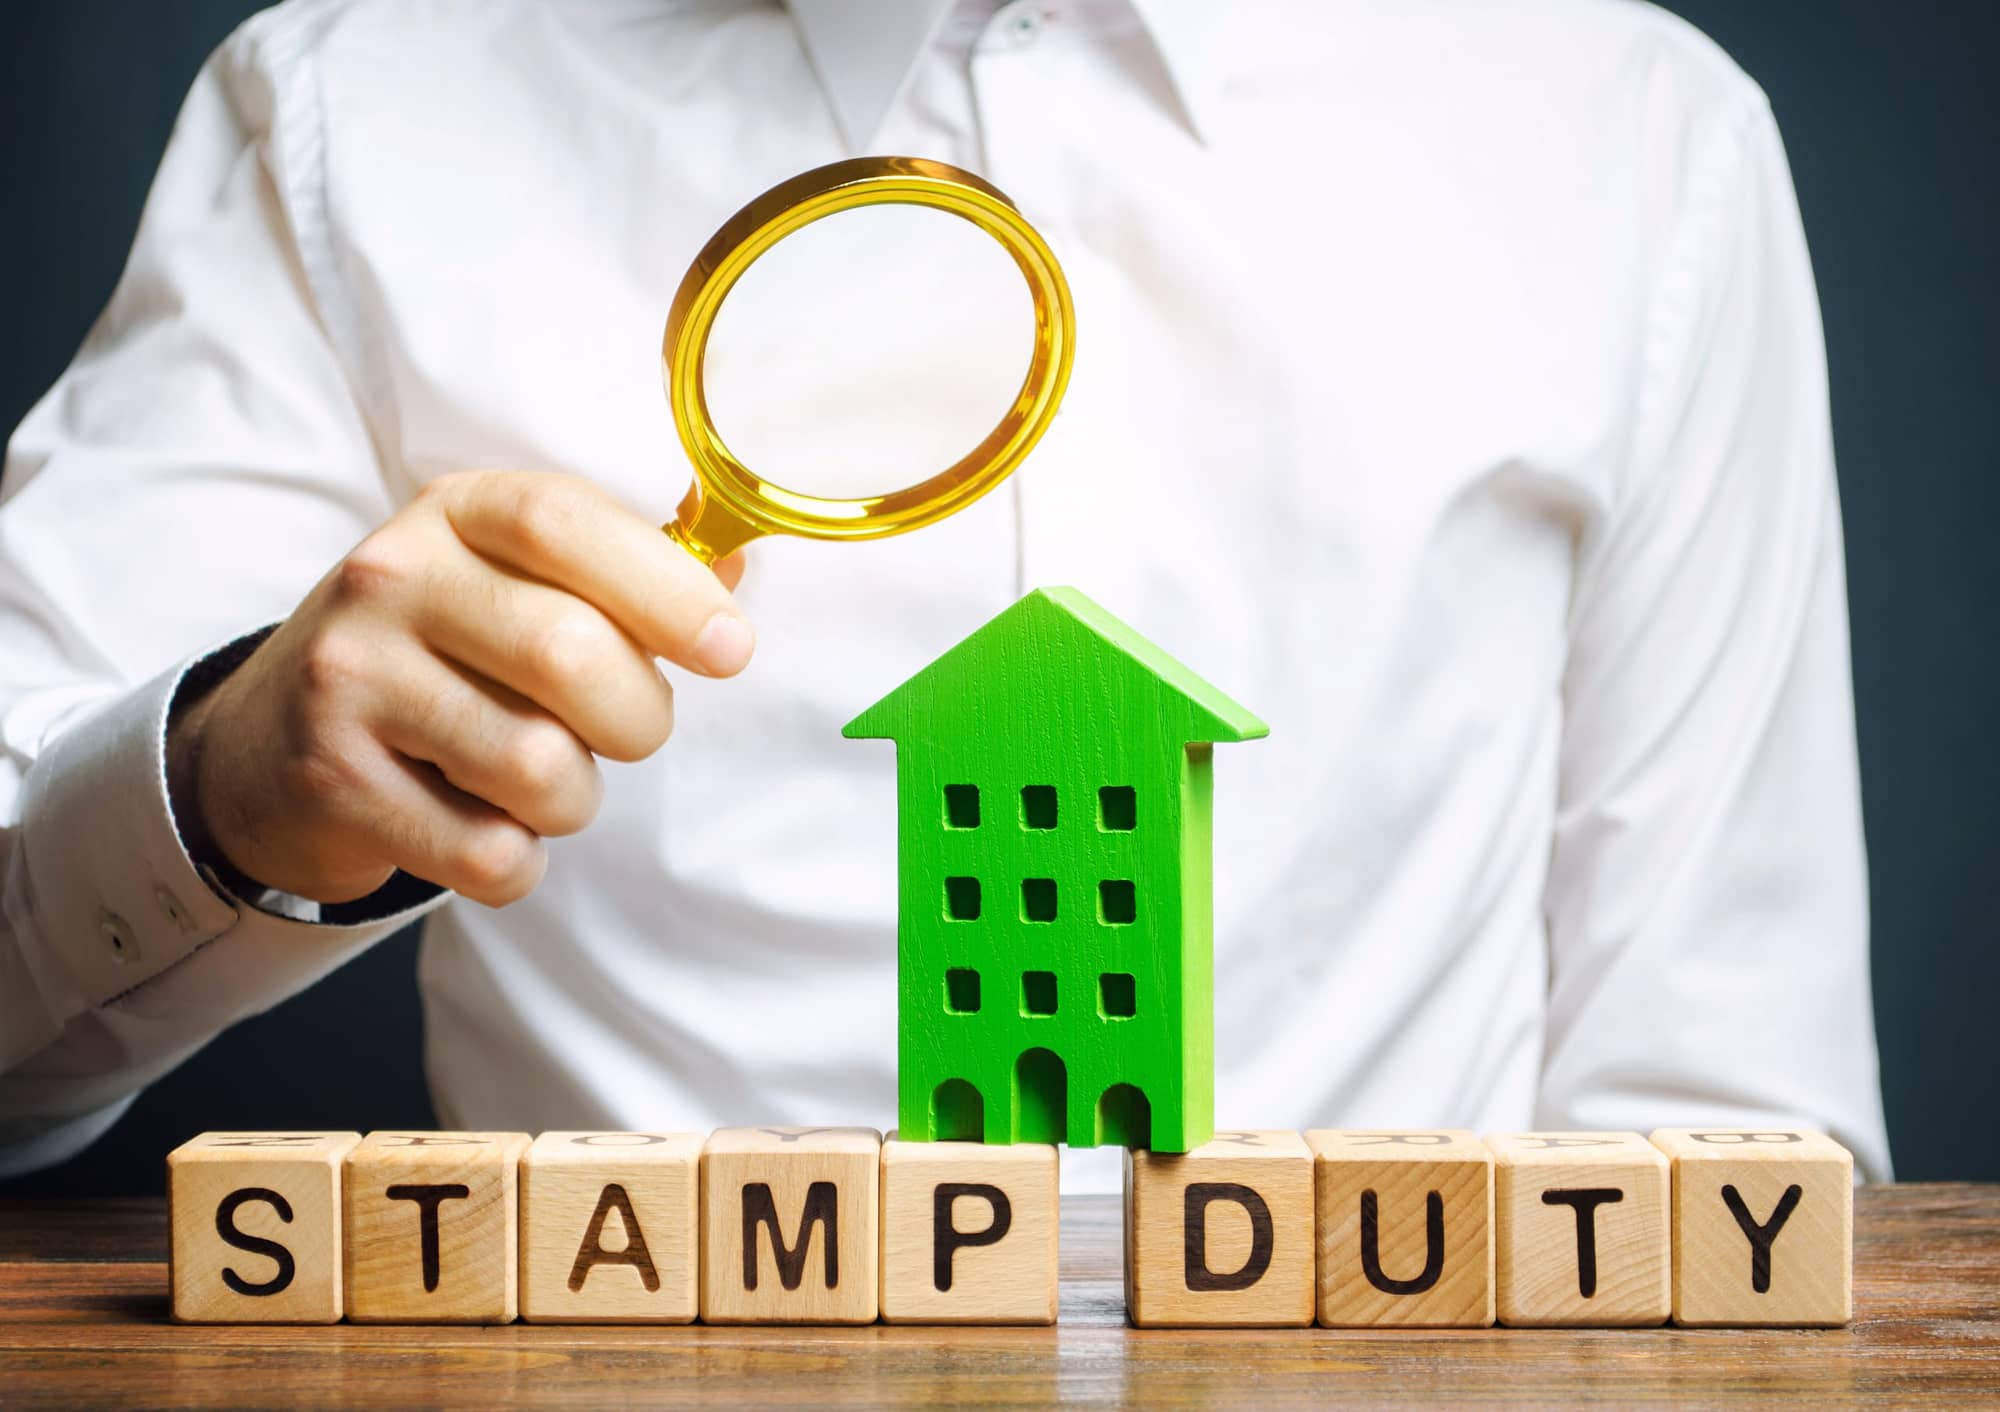 UK Stamp Duty - UK Property Investors And Home Buyers